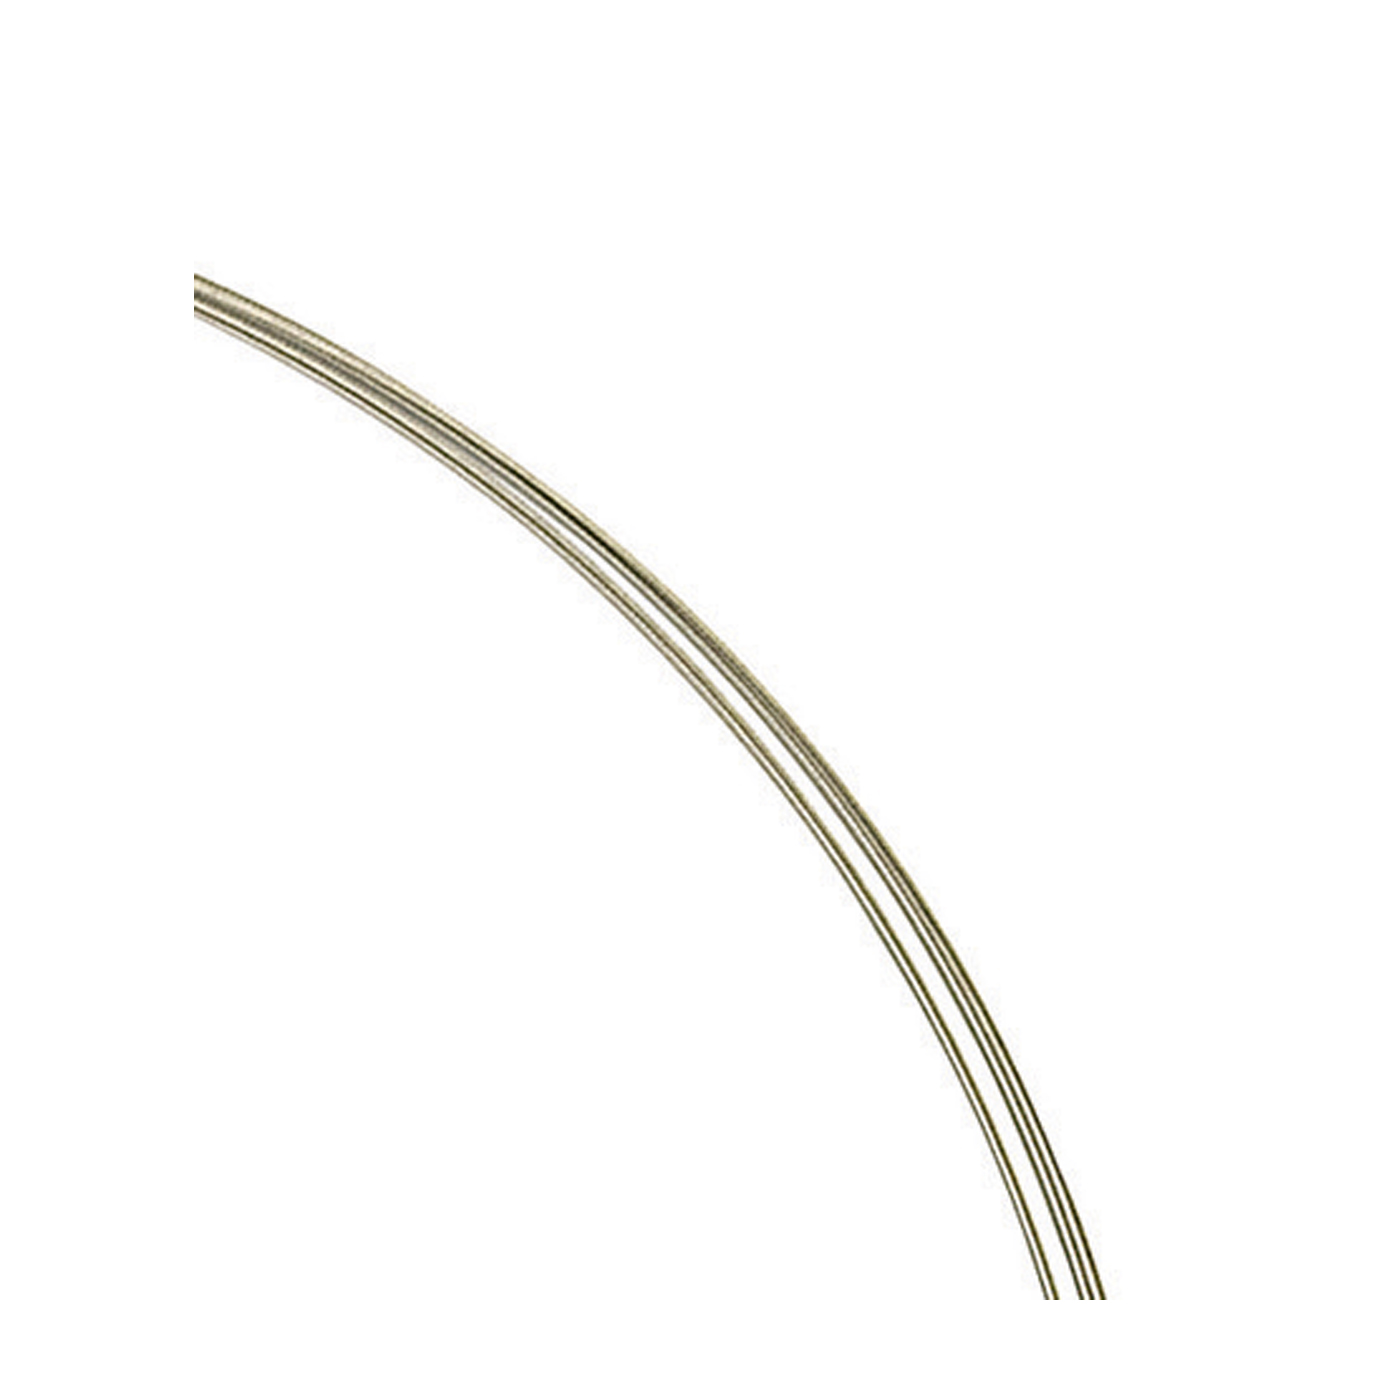 Steel Cable Neck Wire, 5-Strand, ø 0.3 mm, 45 cm - 1 piece